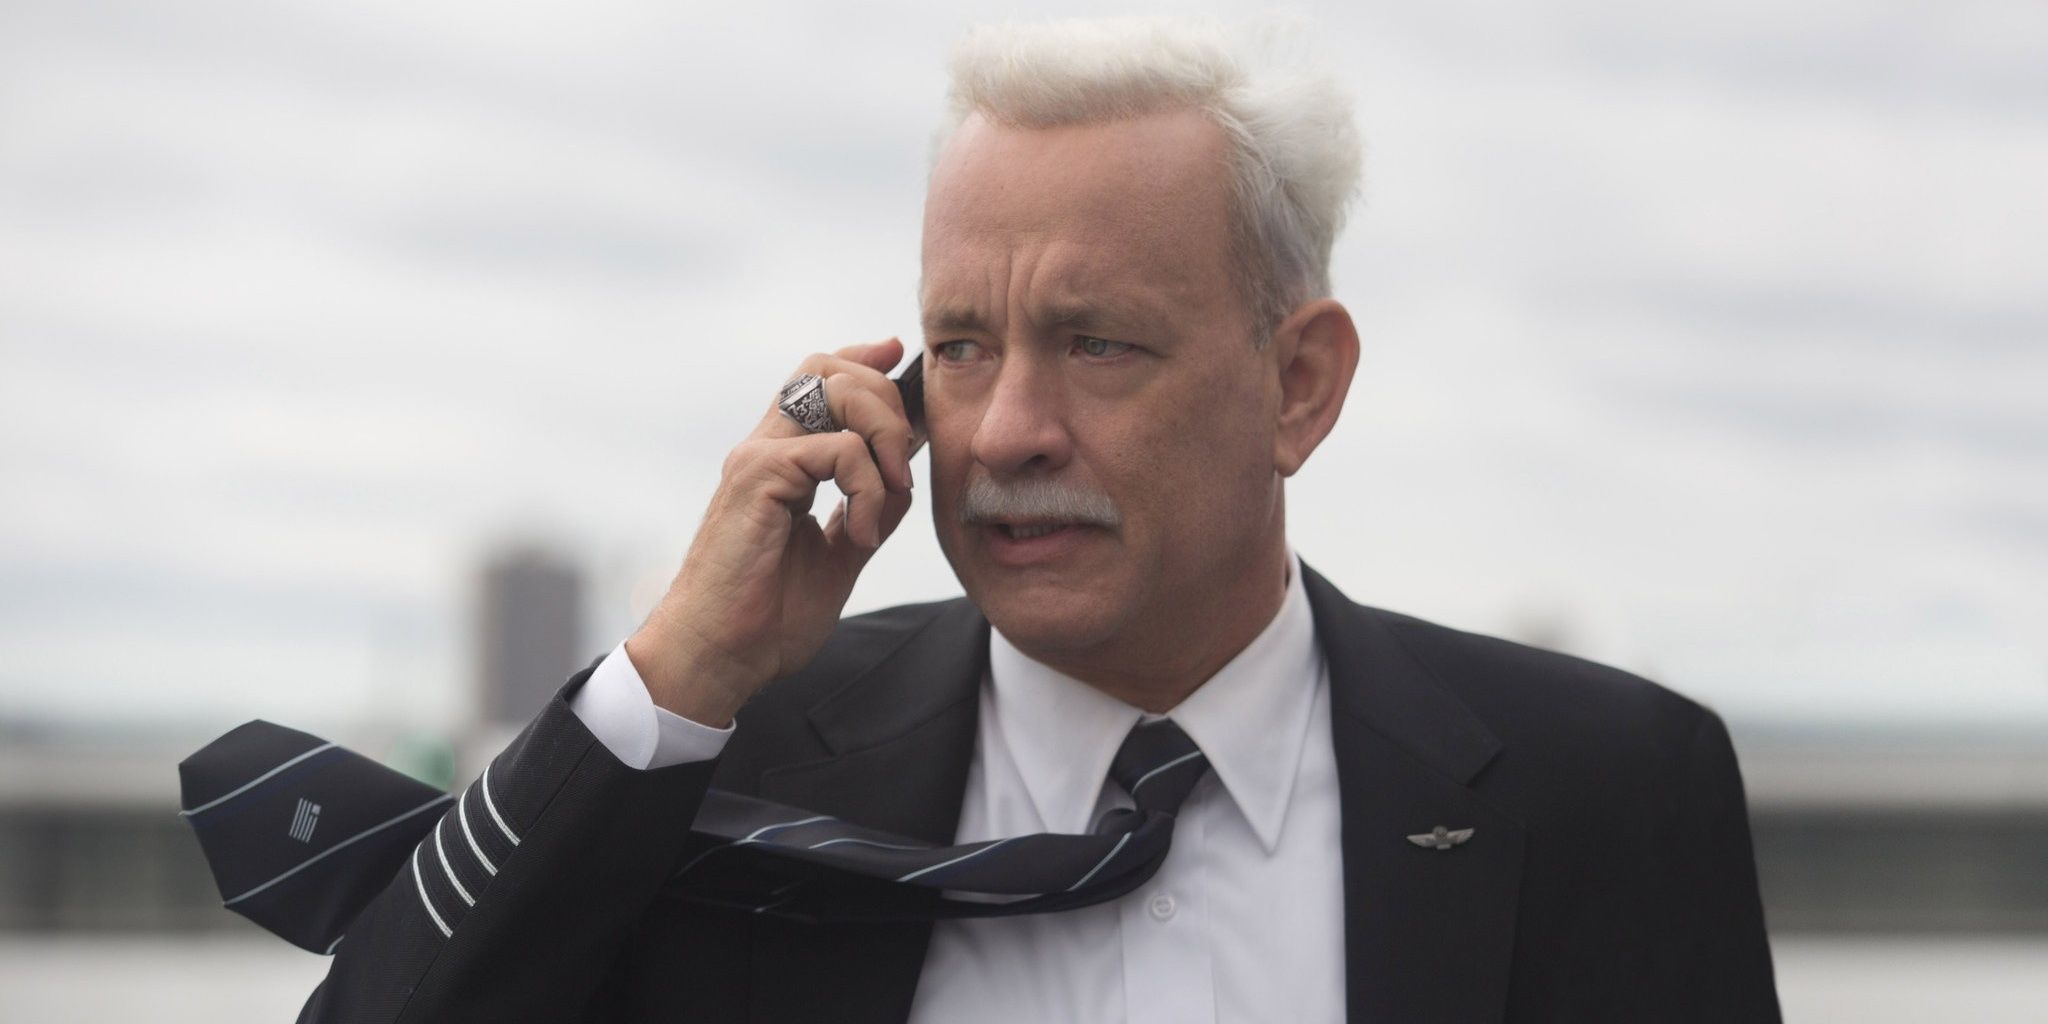 Tom Hanks in Sully on the phone